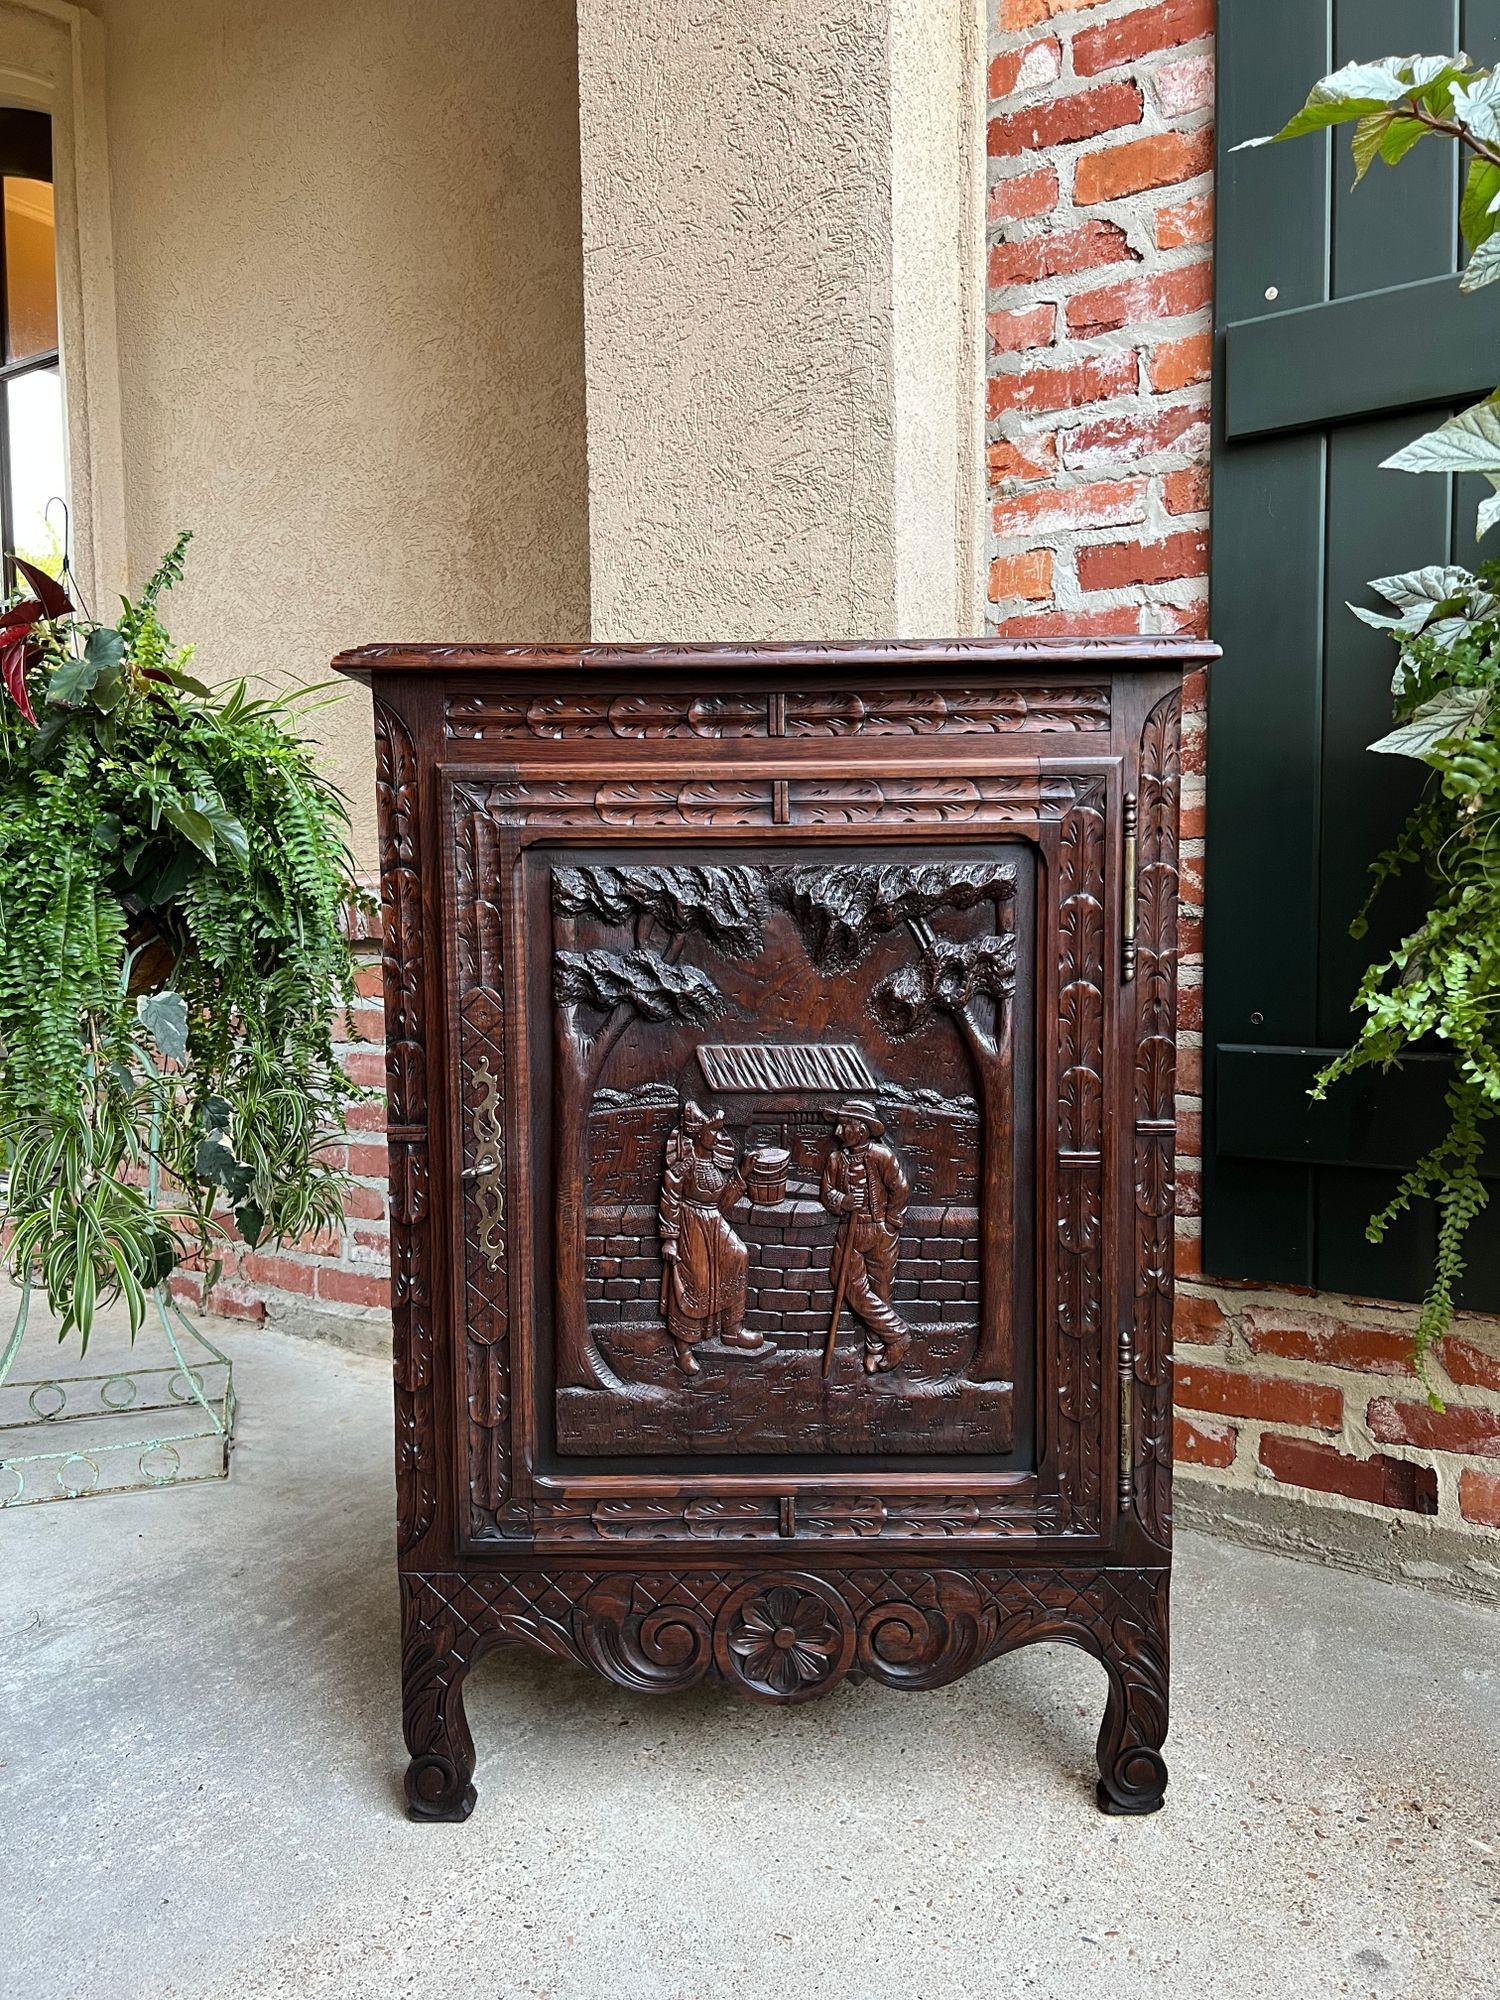 19th Century Antique French carved oak cabinet Breton Brittany wine liquor sideboard.
 
Direct from the Brittany region of France, a lovely antique French ‘confiturier’ or jam cabinet. These cabinets are one of our most requested antiques, as they